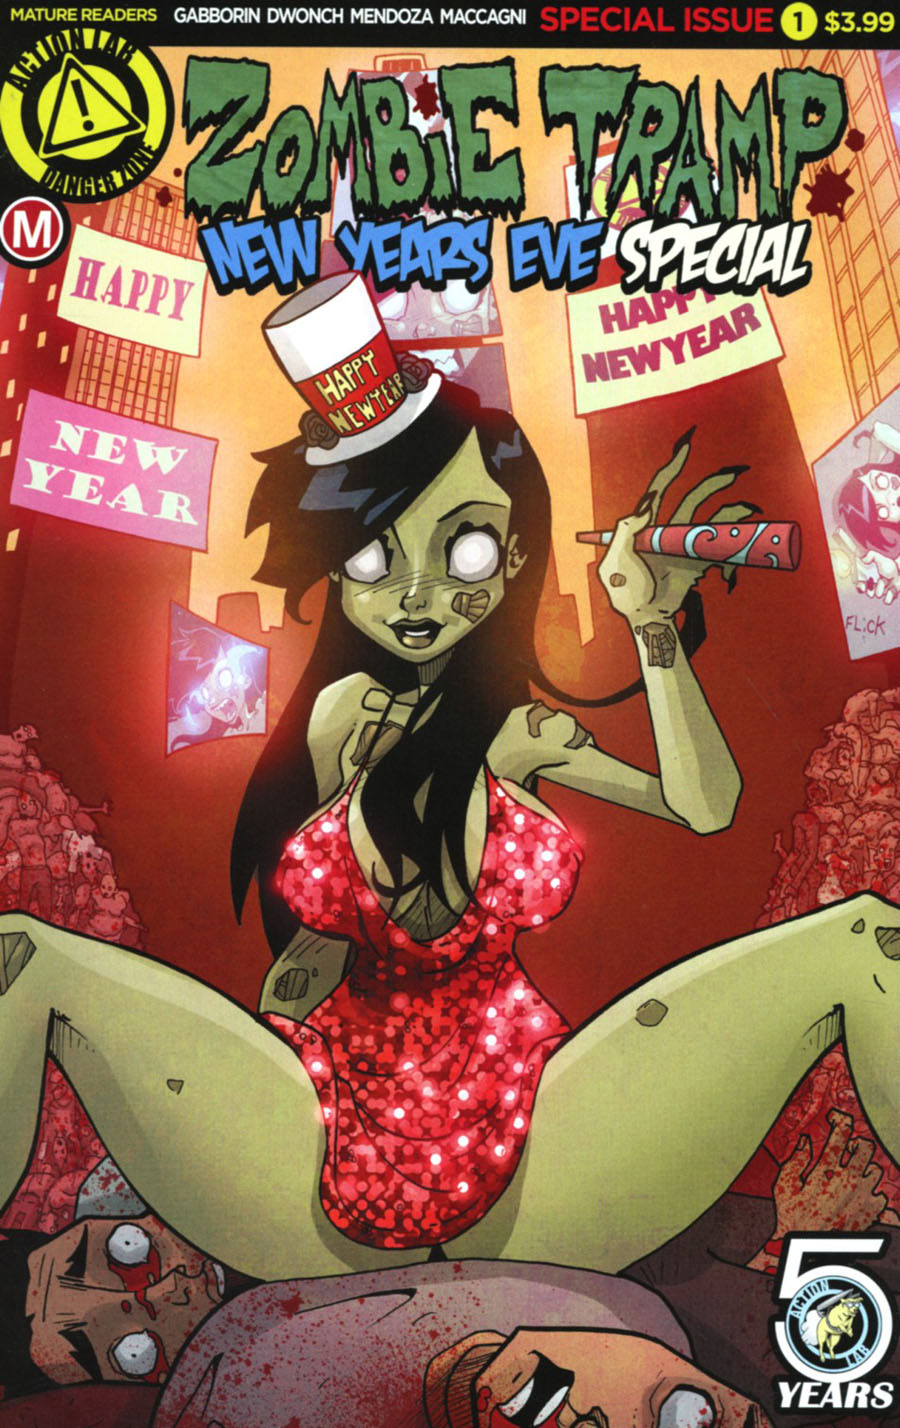 Zombie Tramp New Years Eve 2016 Special Cover A Regular Dan Mendoza Cover